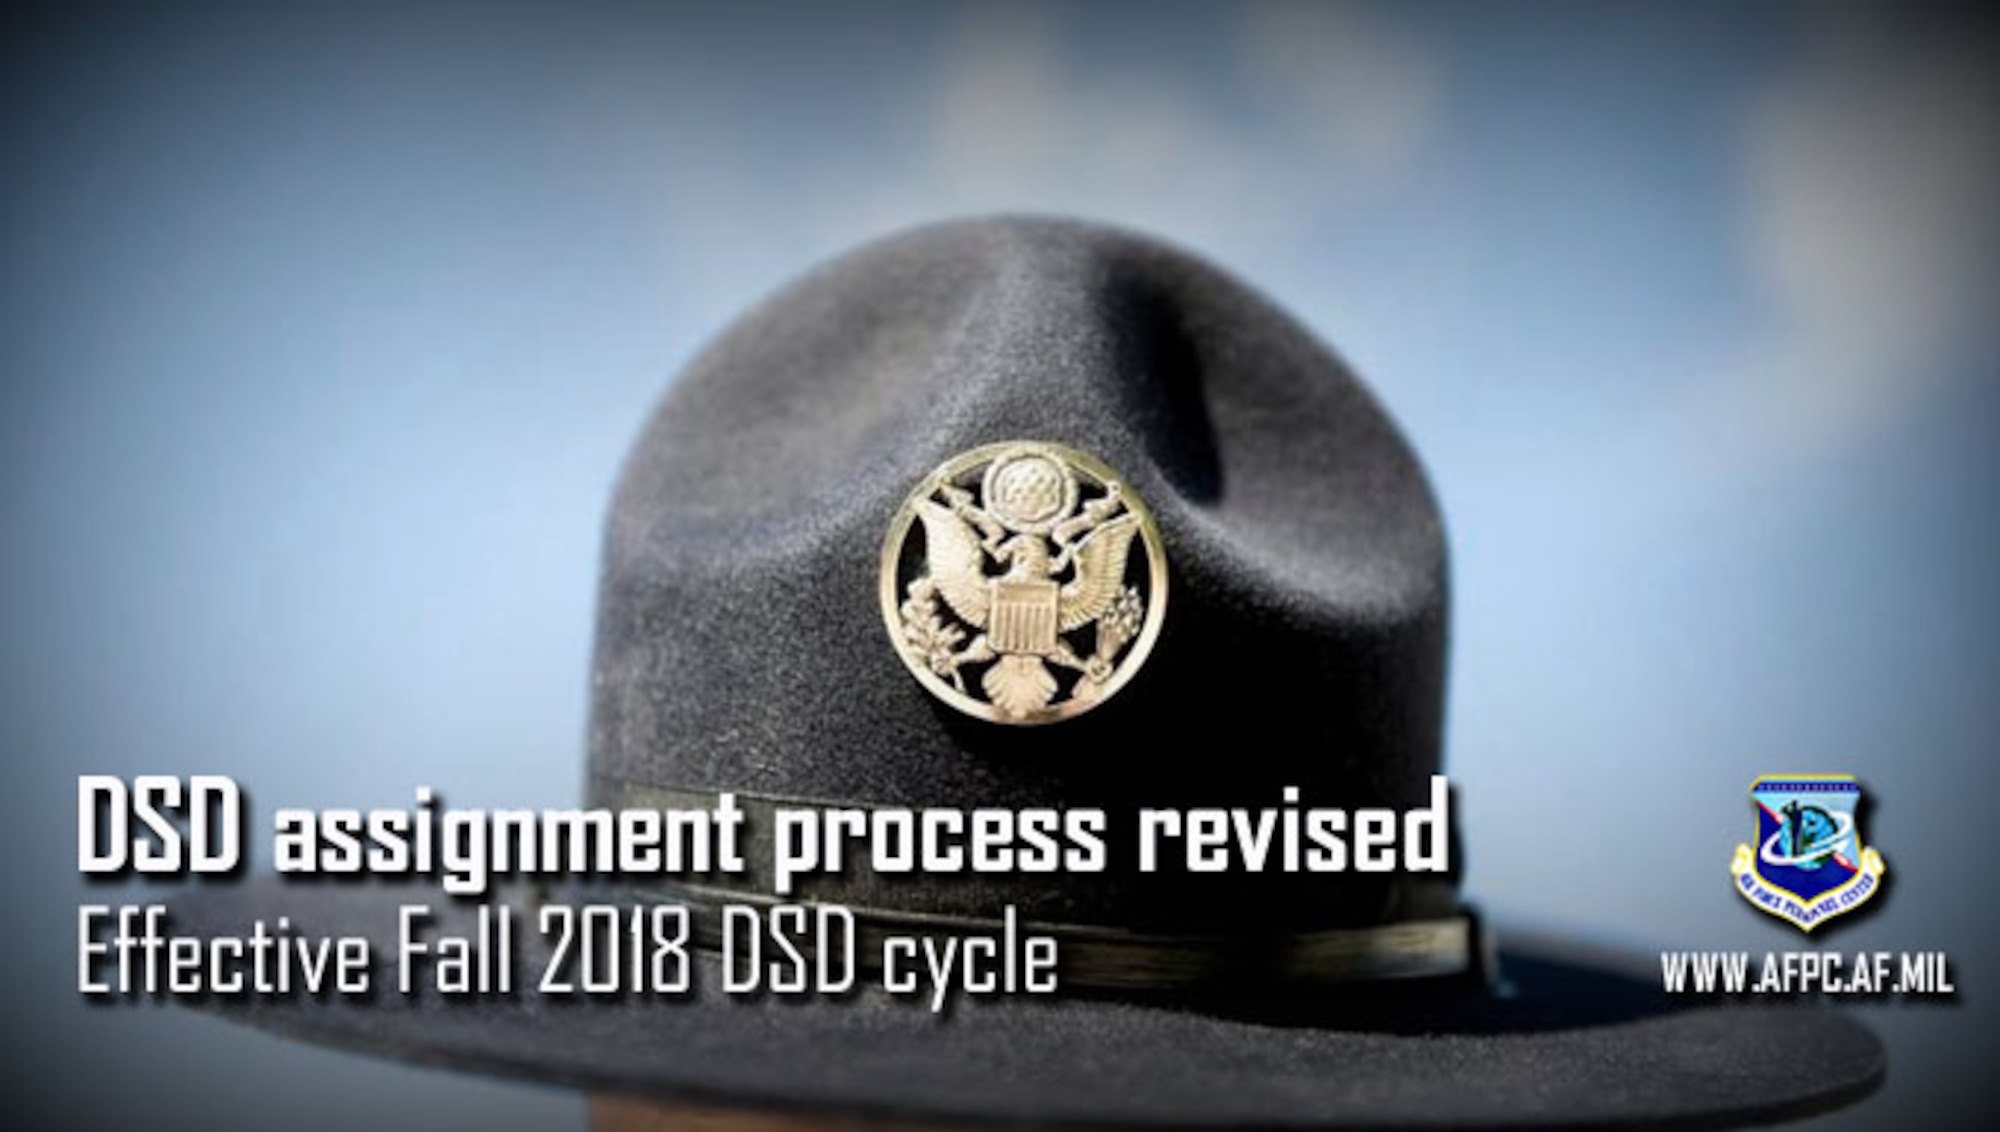 DSD assignment process revised effective Fall 2018 DSD cycle